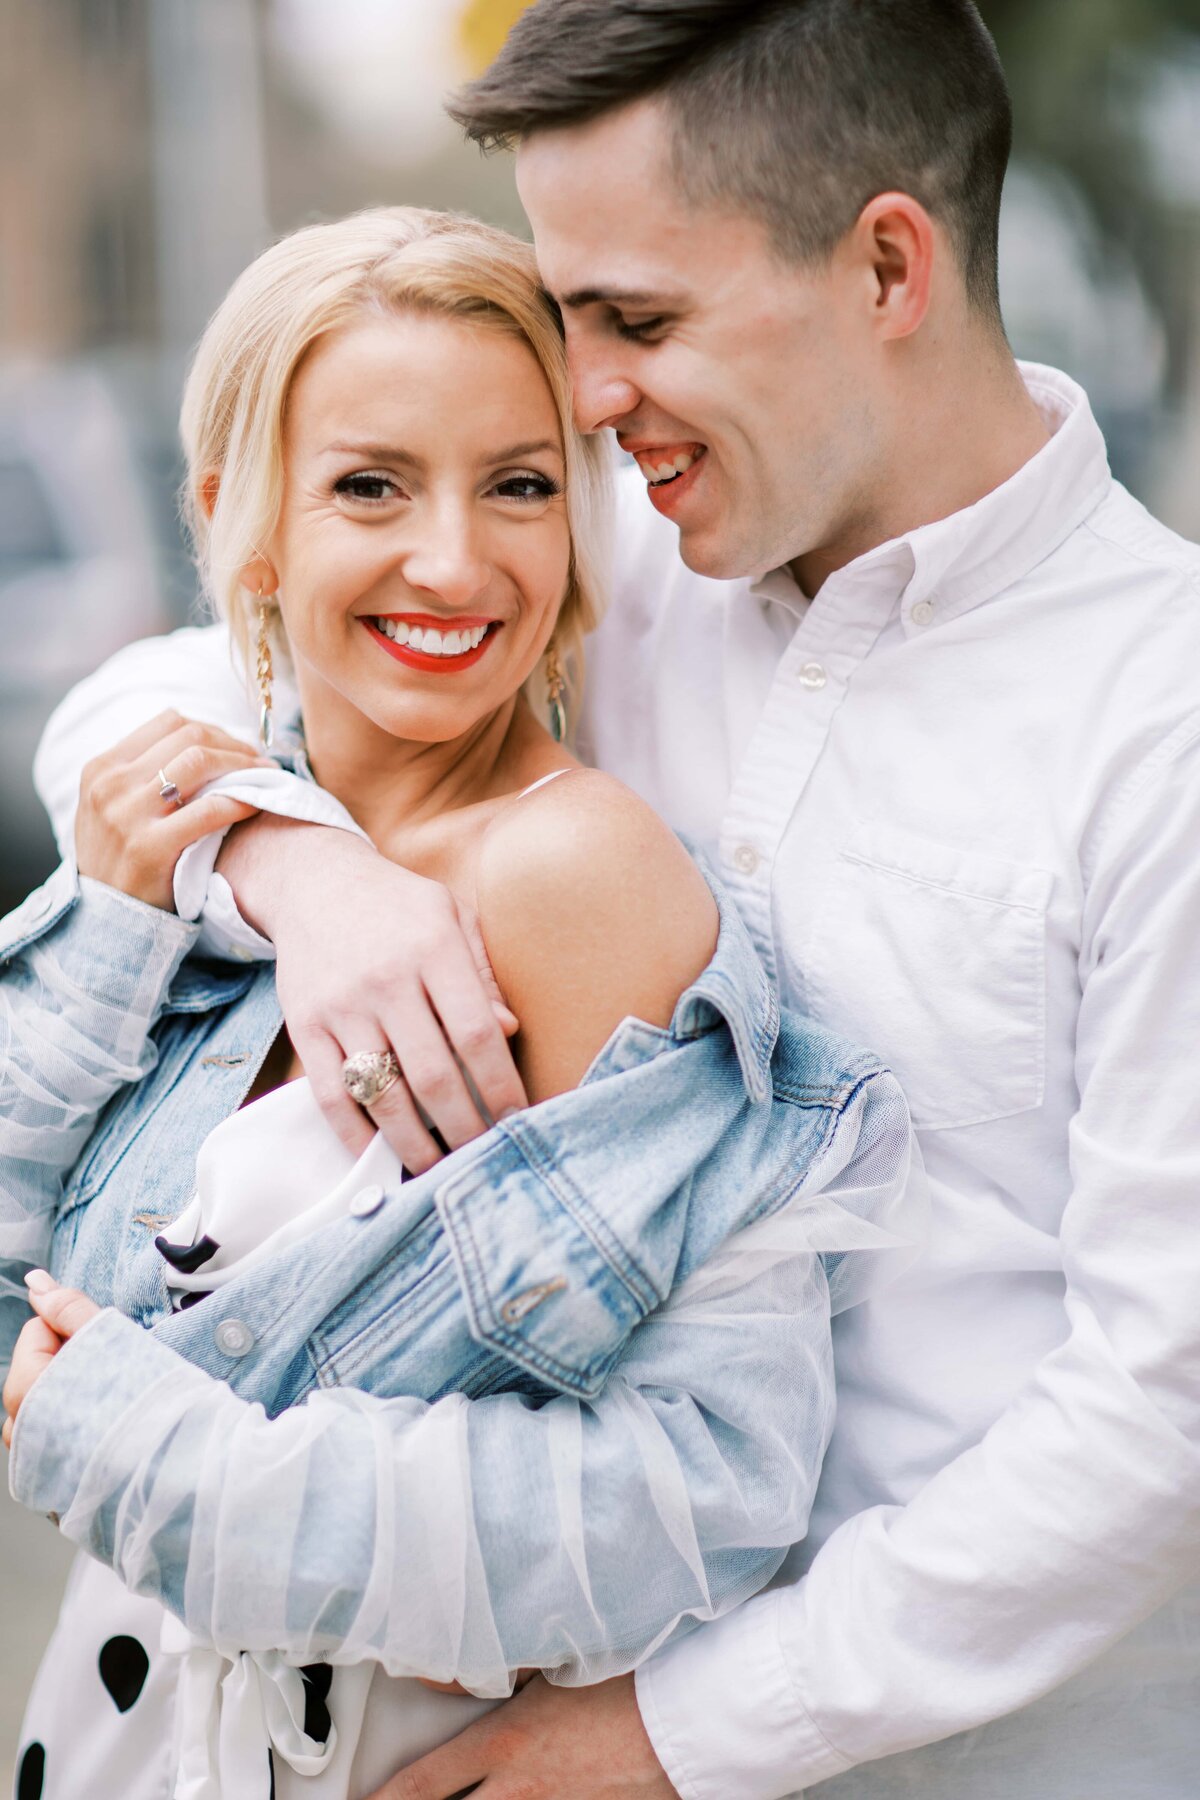 Smiling bride in polka dot outfit is being hugged by groom in a white button down shirt on the streets of Charleston